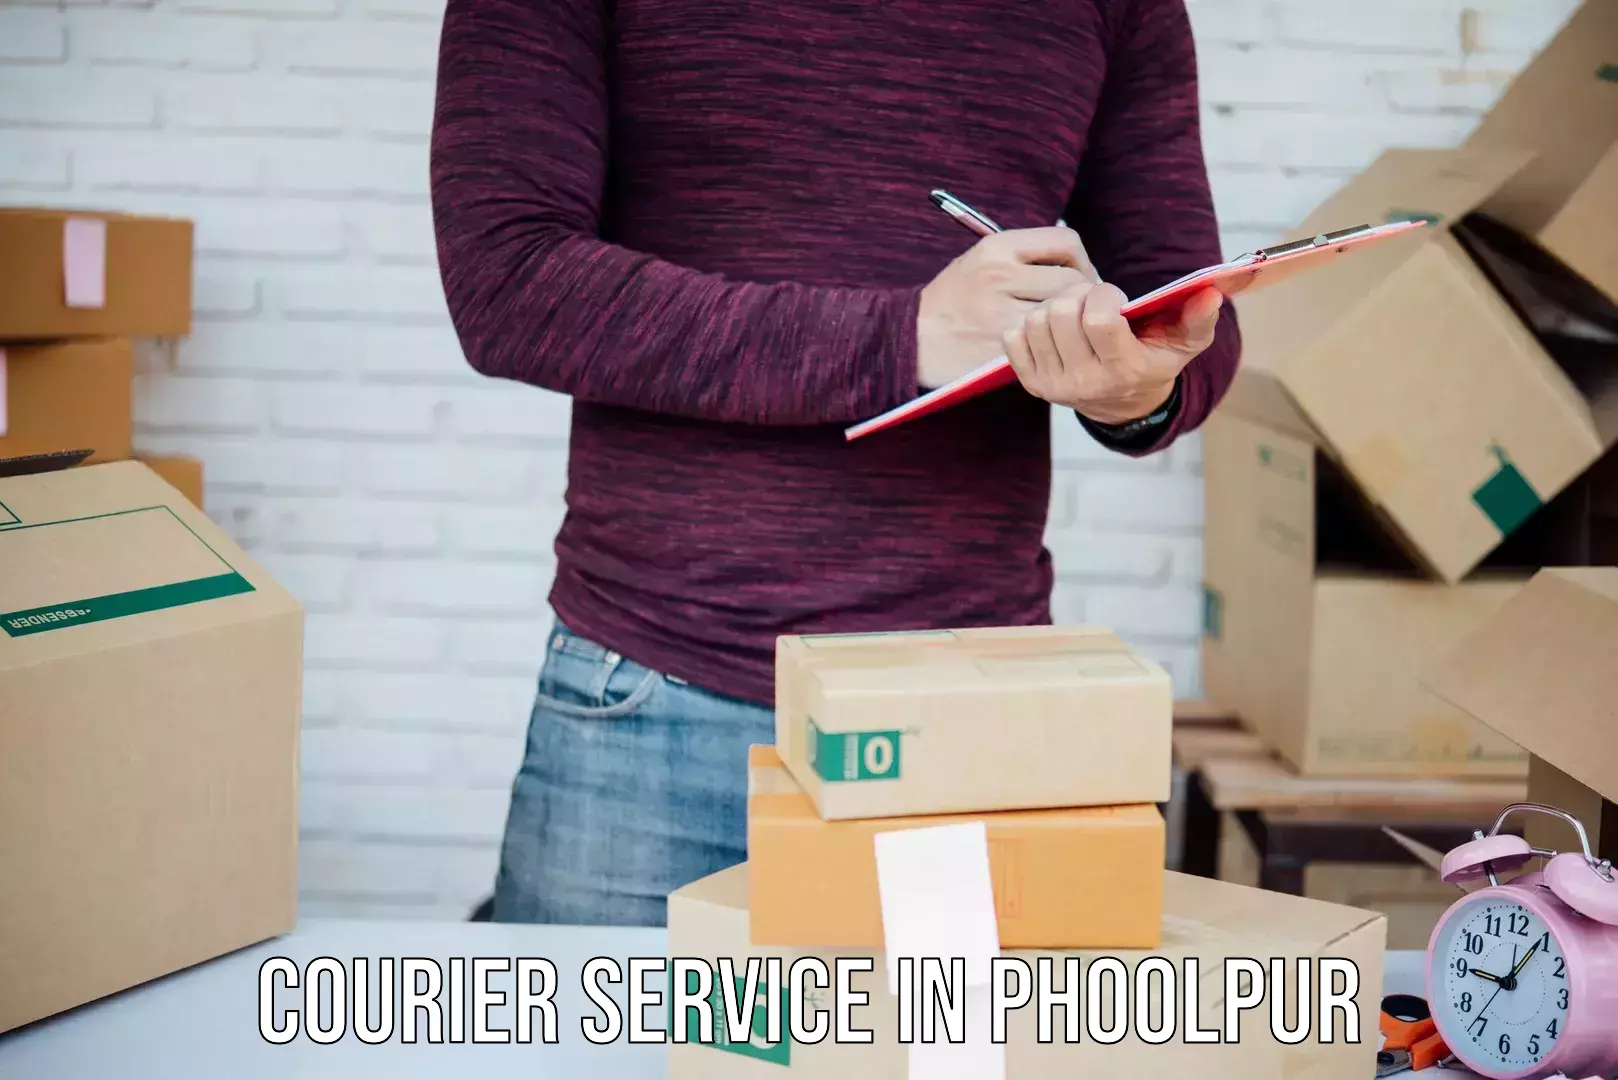 Cash on delivery service in Phoolpur